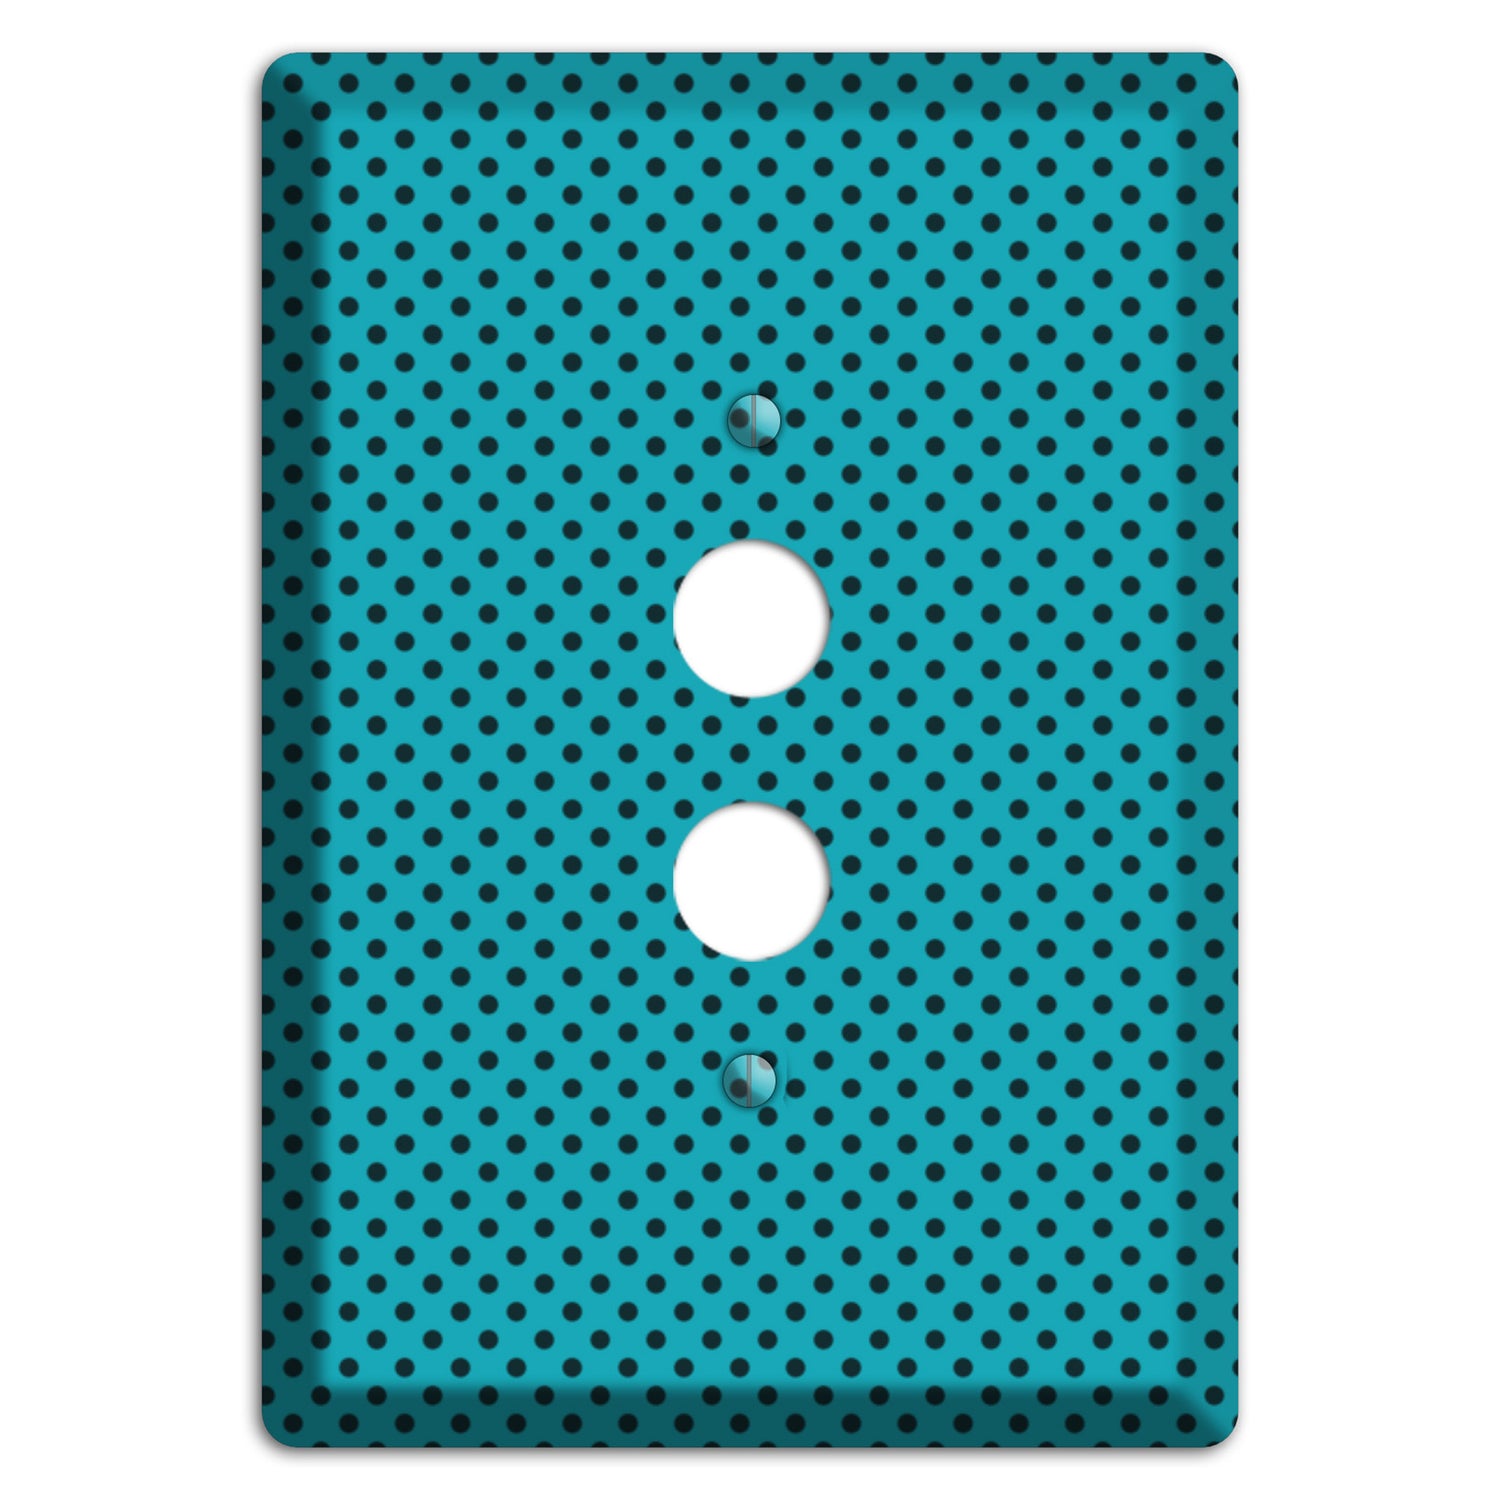 Turquoise with Polka Dots 1 Pushbutton Wallplate